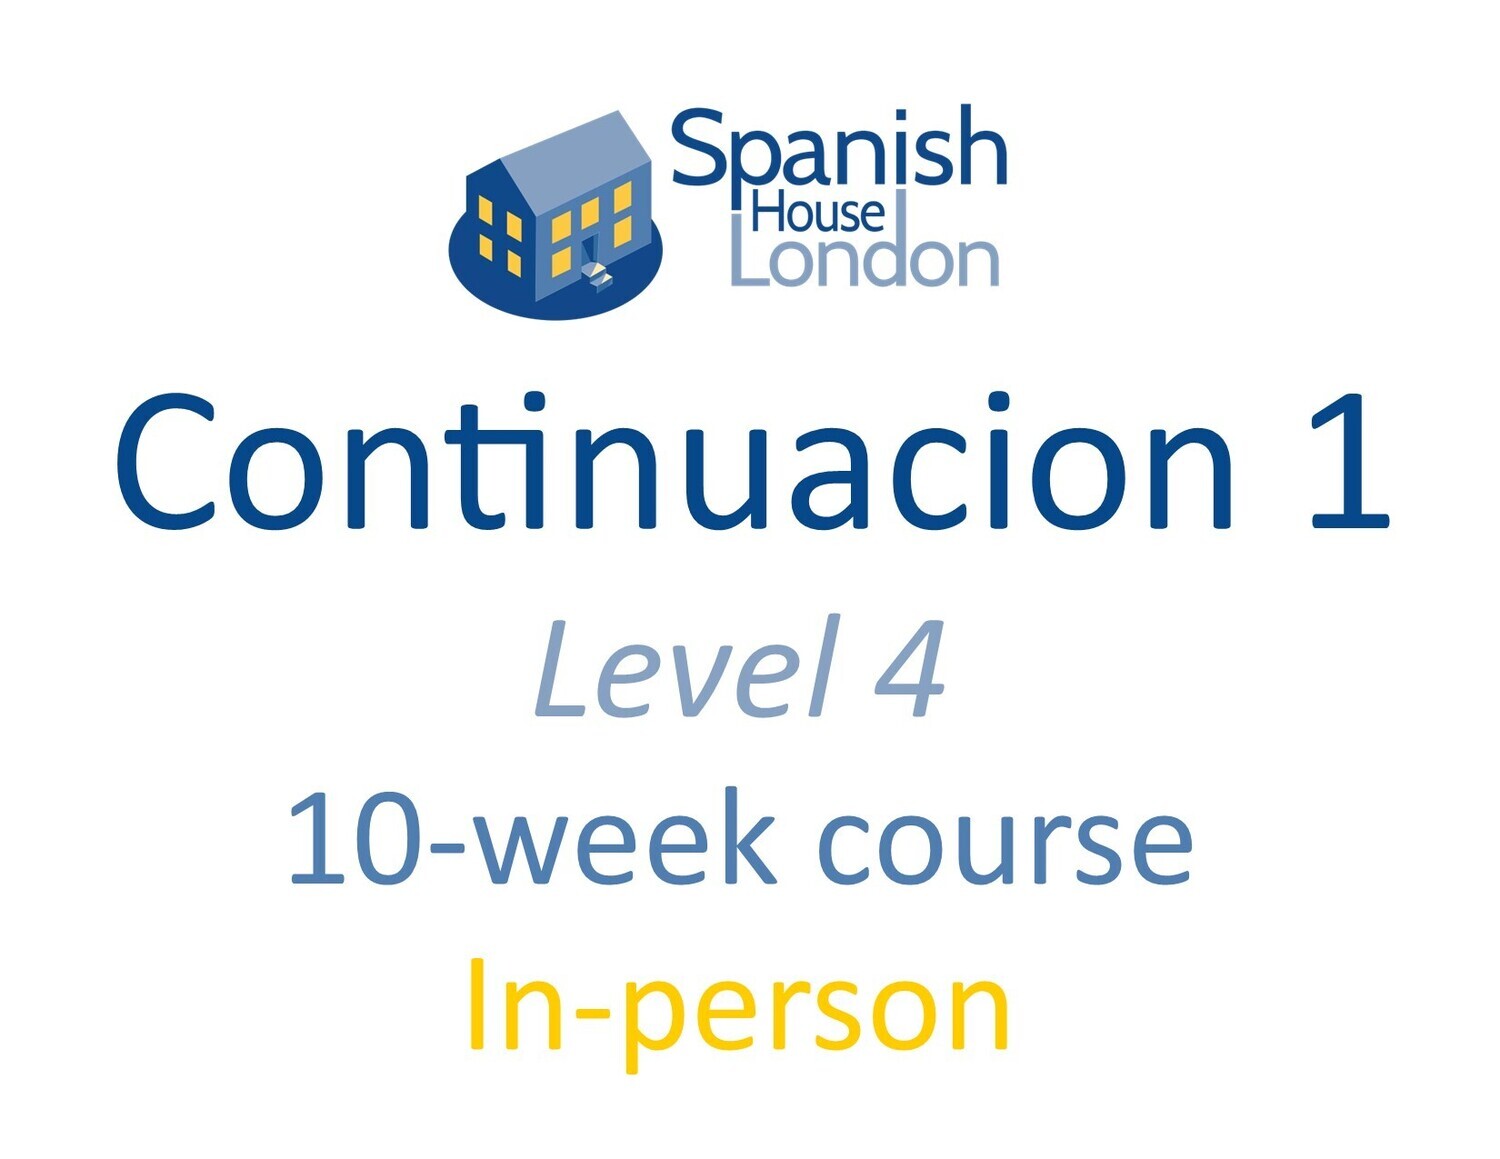 Continuacion 1 Course starting on 6th December at 7.30pm in Clapham North